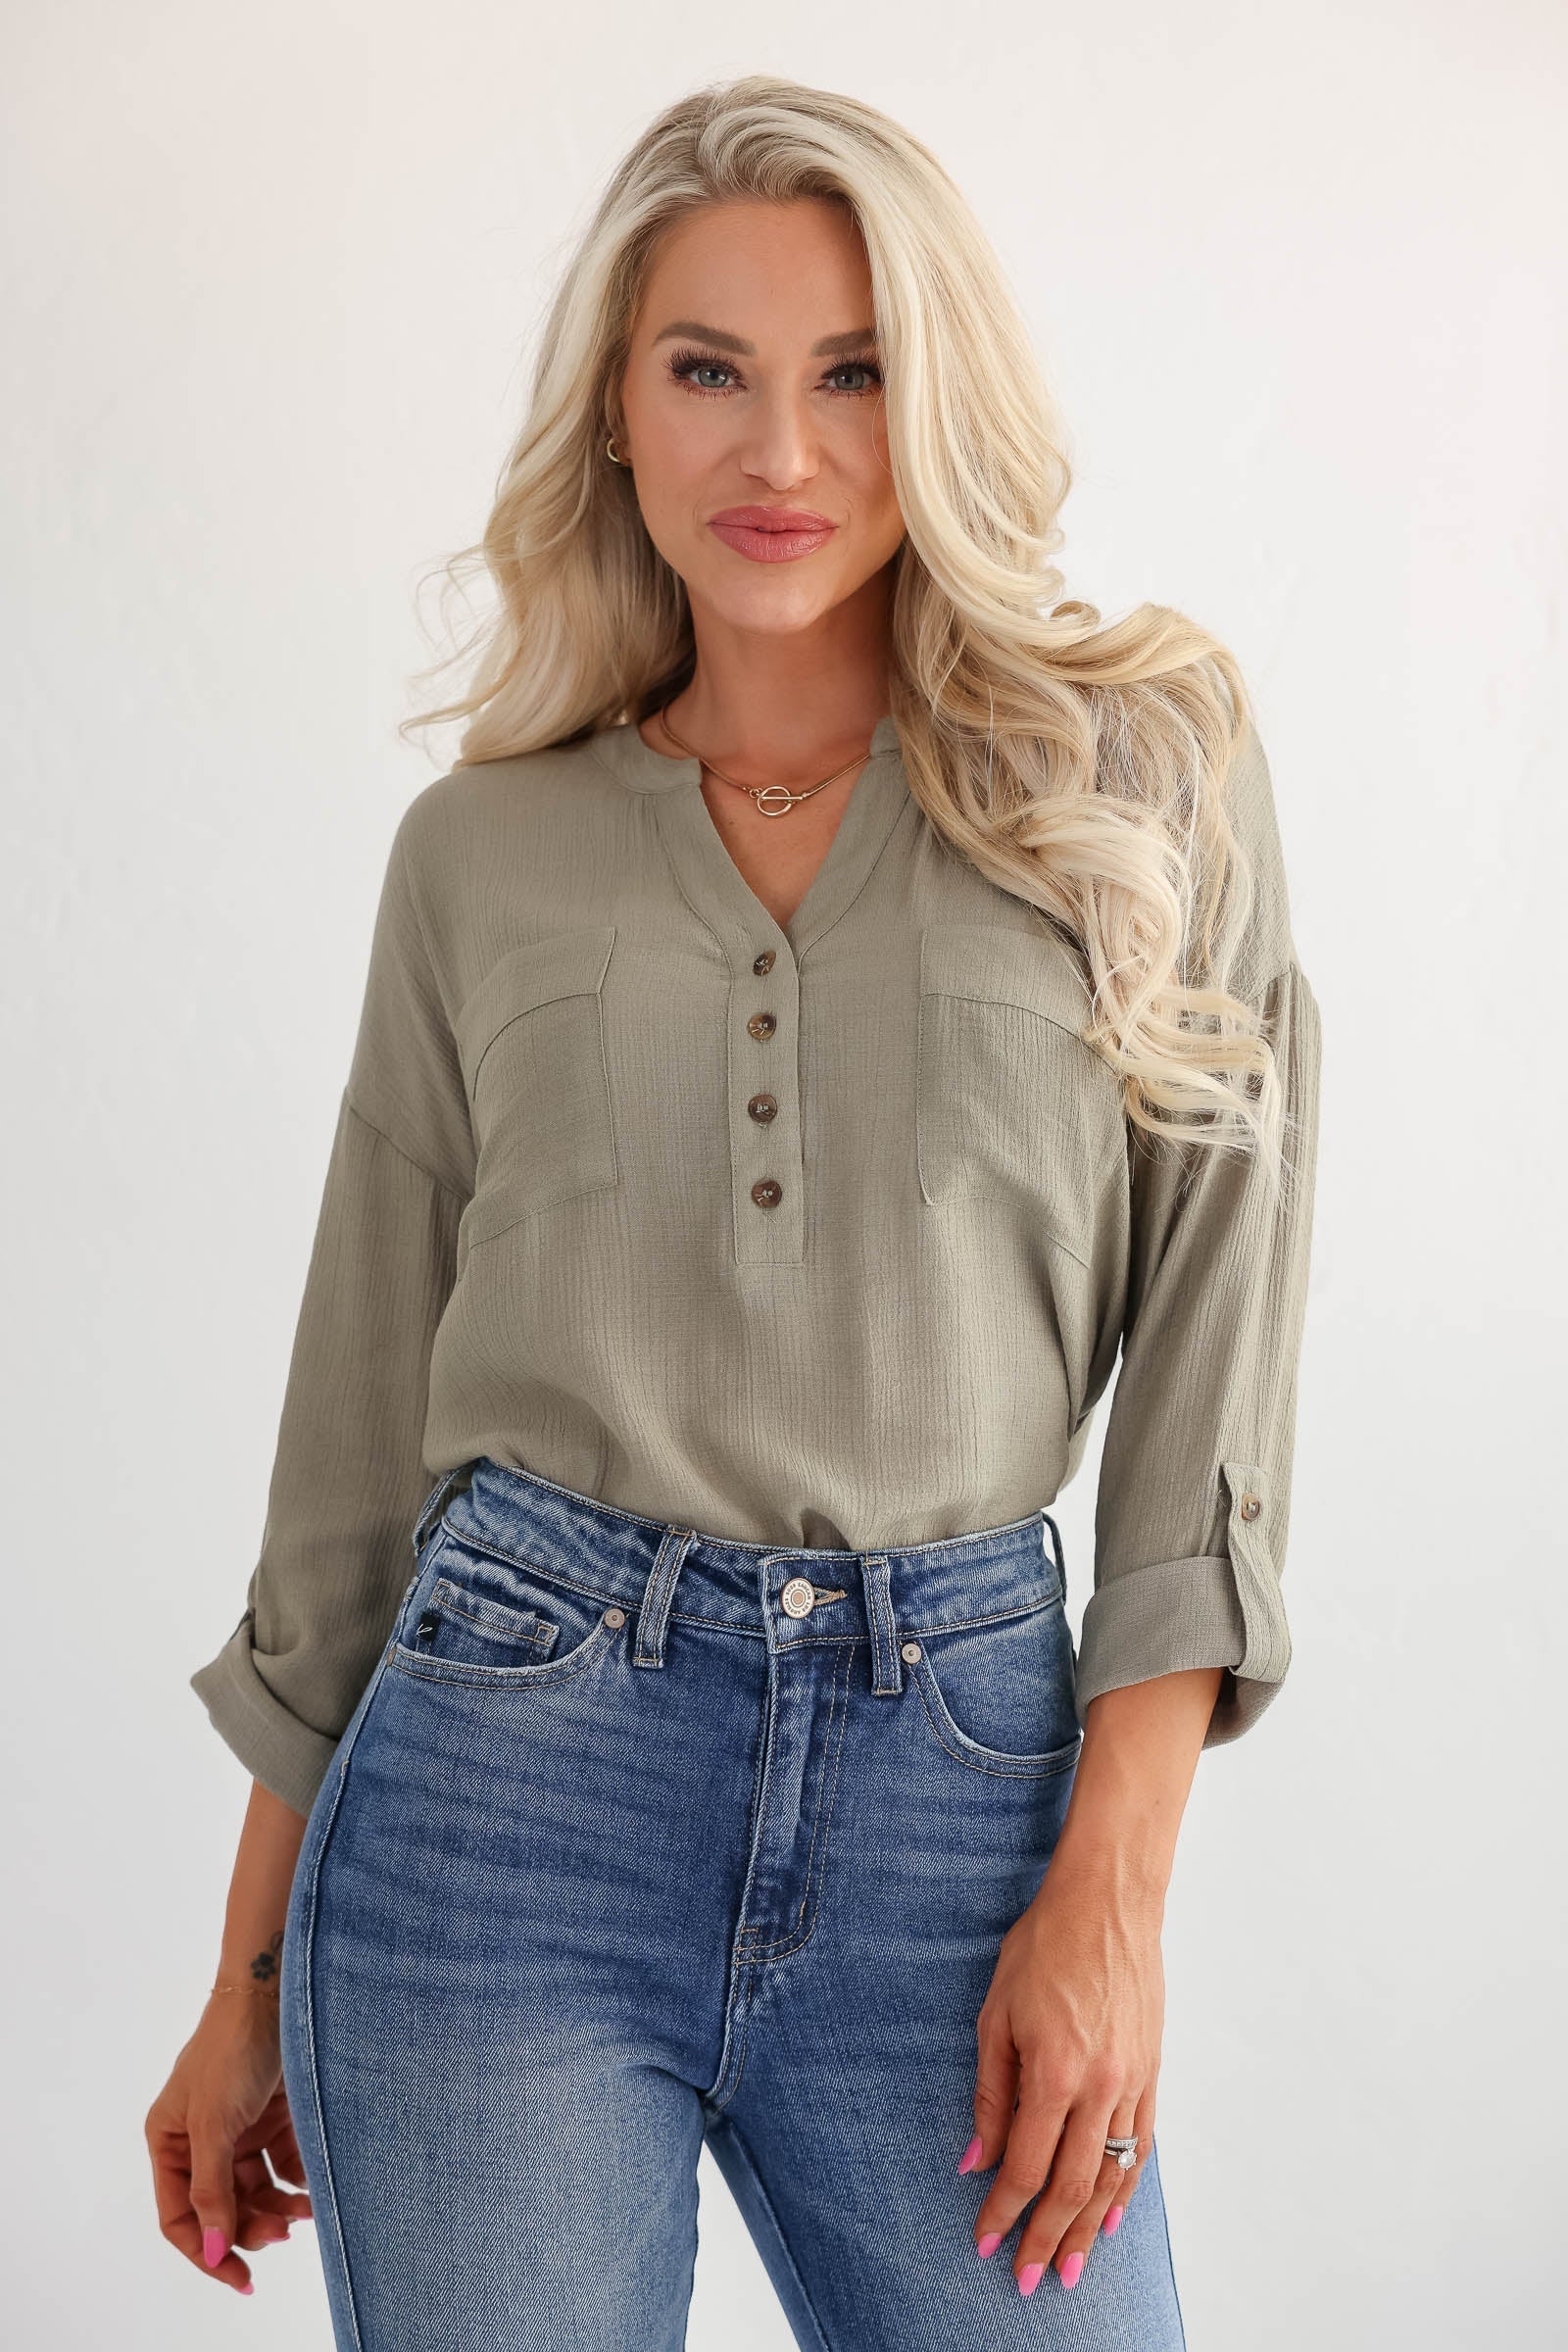 She's Like So Professional Top - Olive, Closet Candy, 1